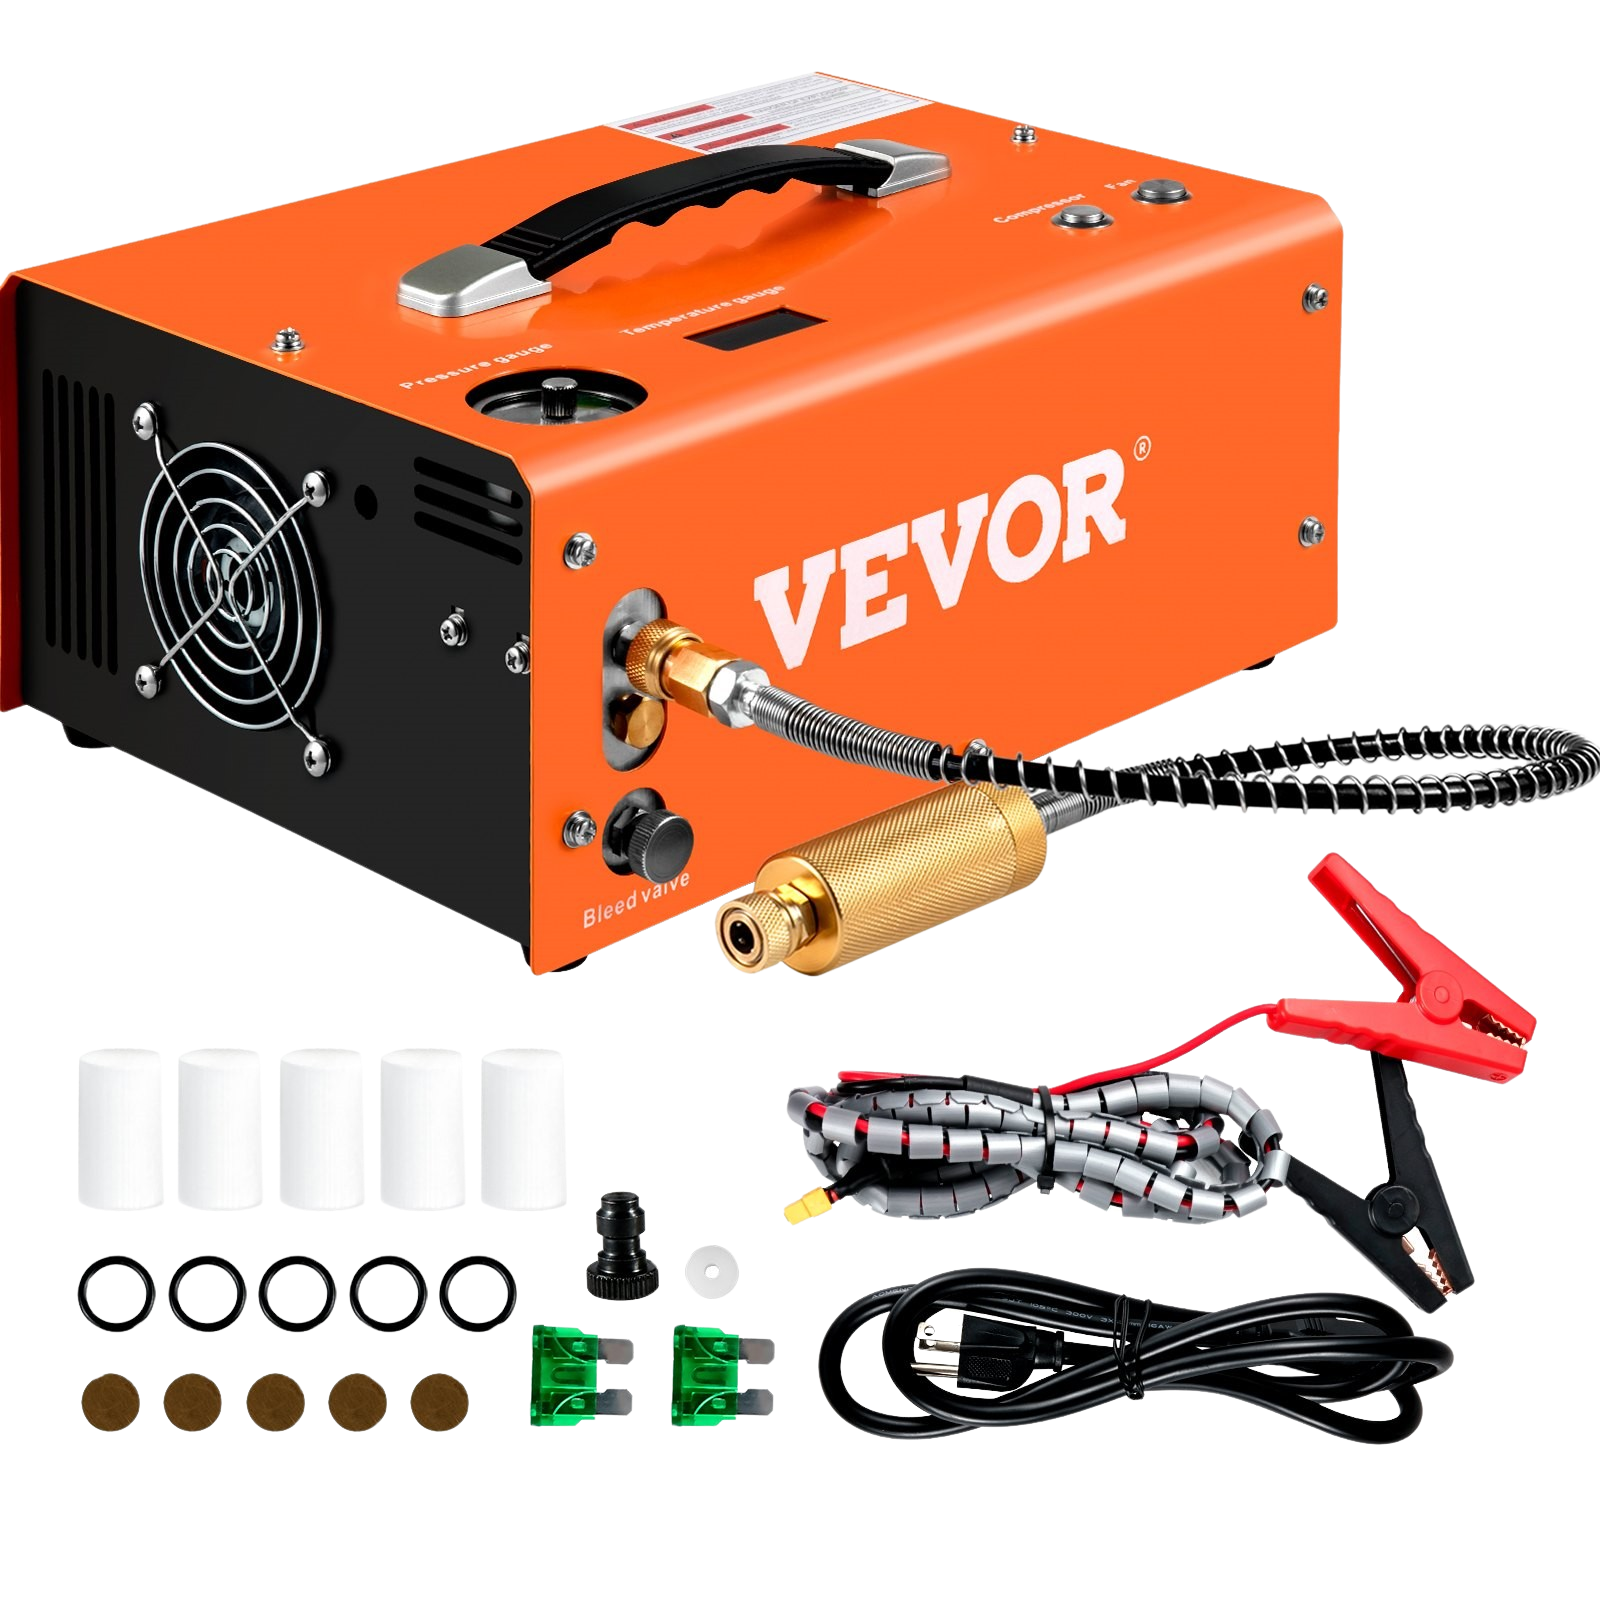 Vevor PCP Air Compressor 4500 PSI 0.4 Gal Portable 110V/220V With Auto Stop Built In Adapter And Fan VV-GYDQBJS New